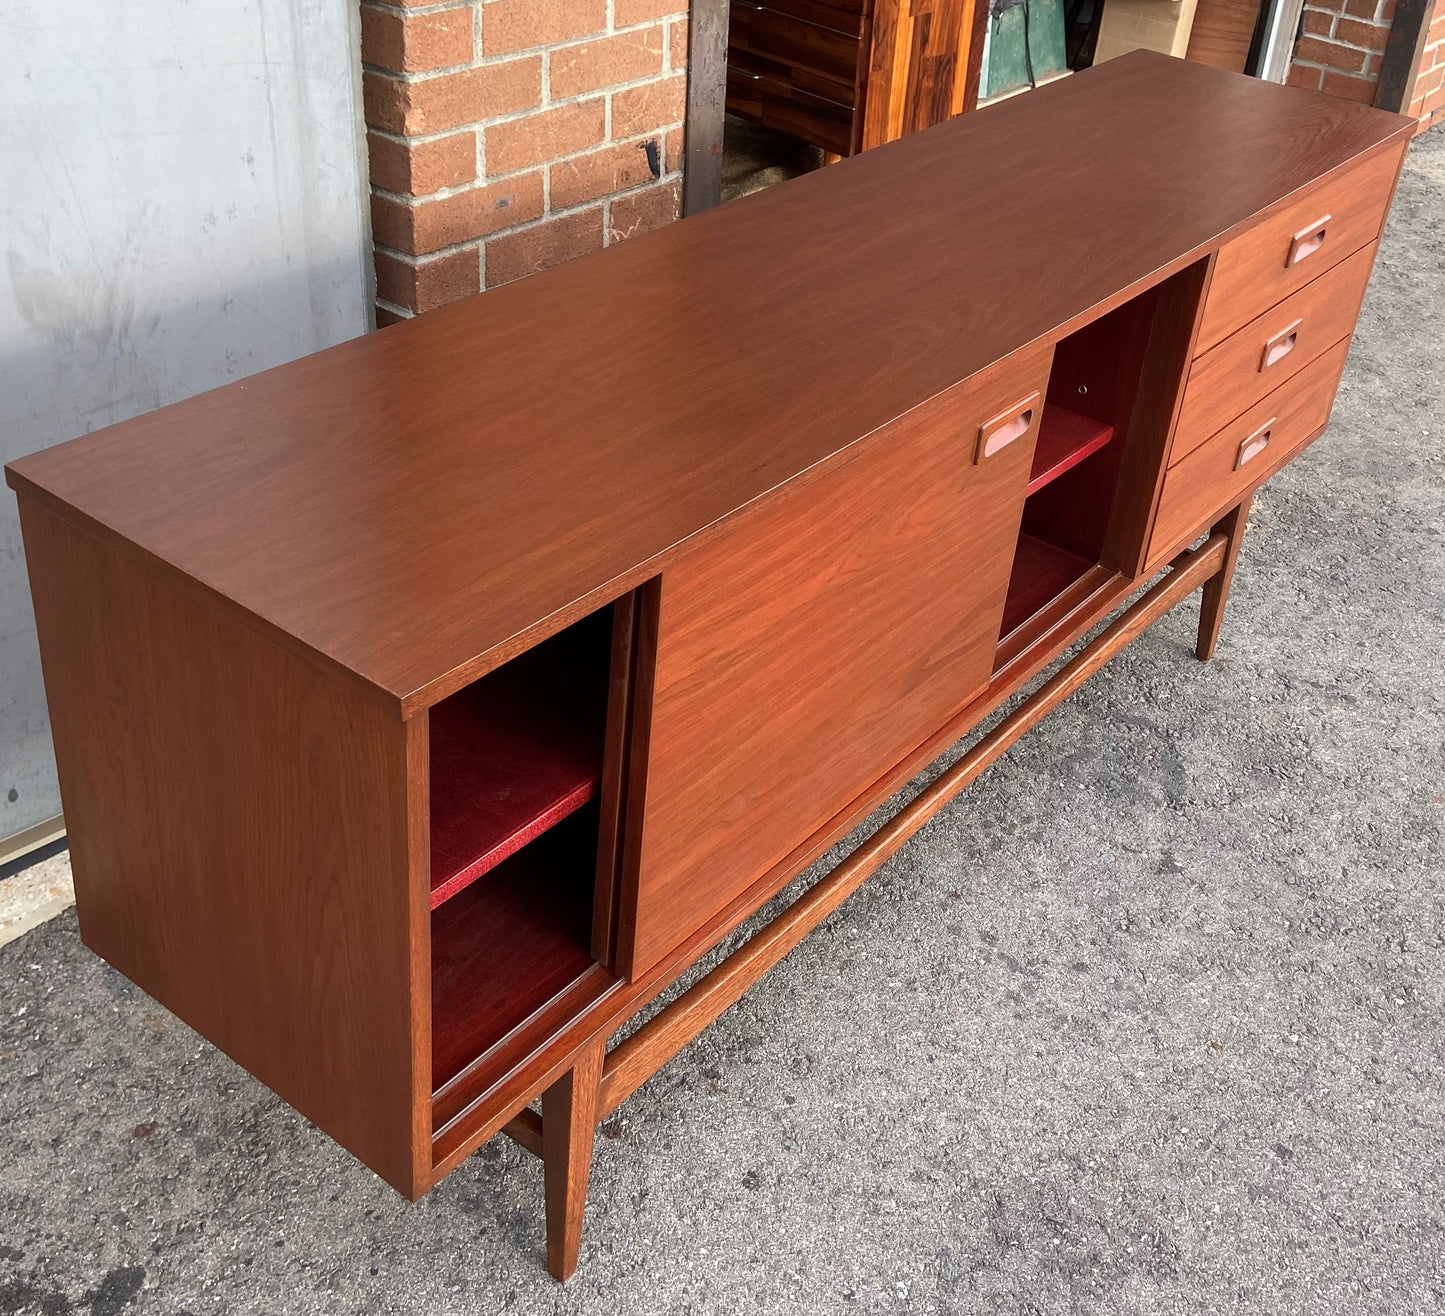 REFINISHED Mid Century Modern Sideboard Credenza Narrow 70.5"